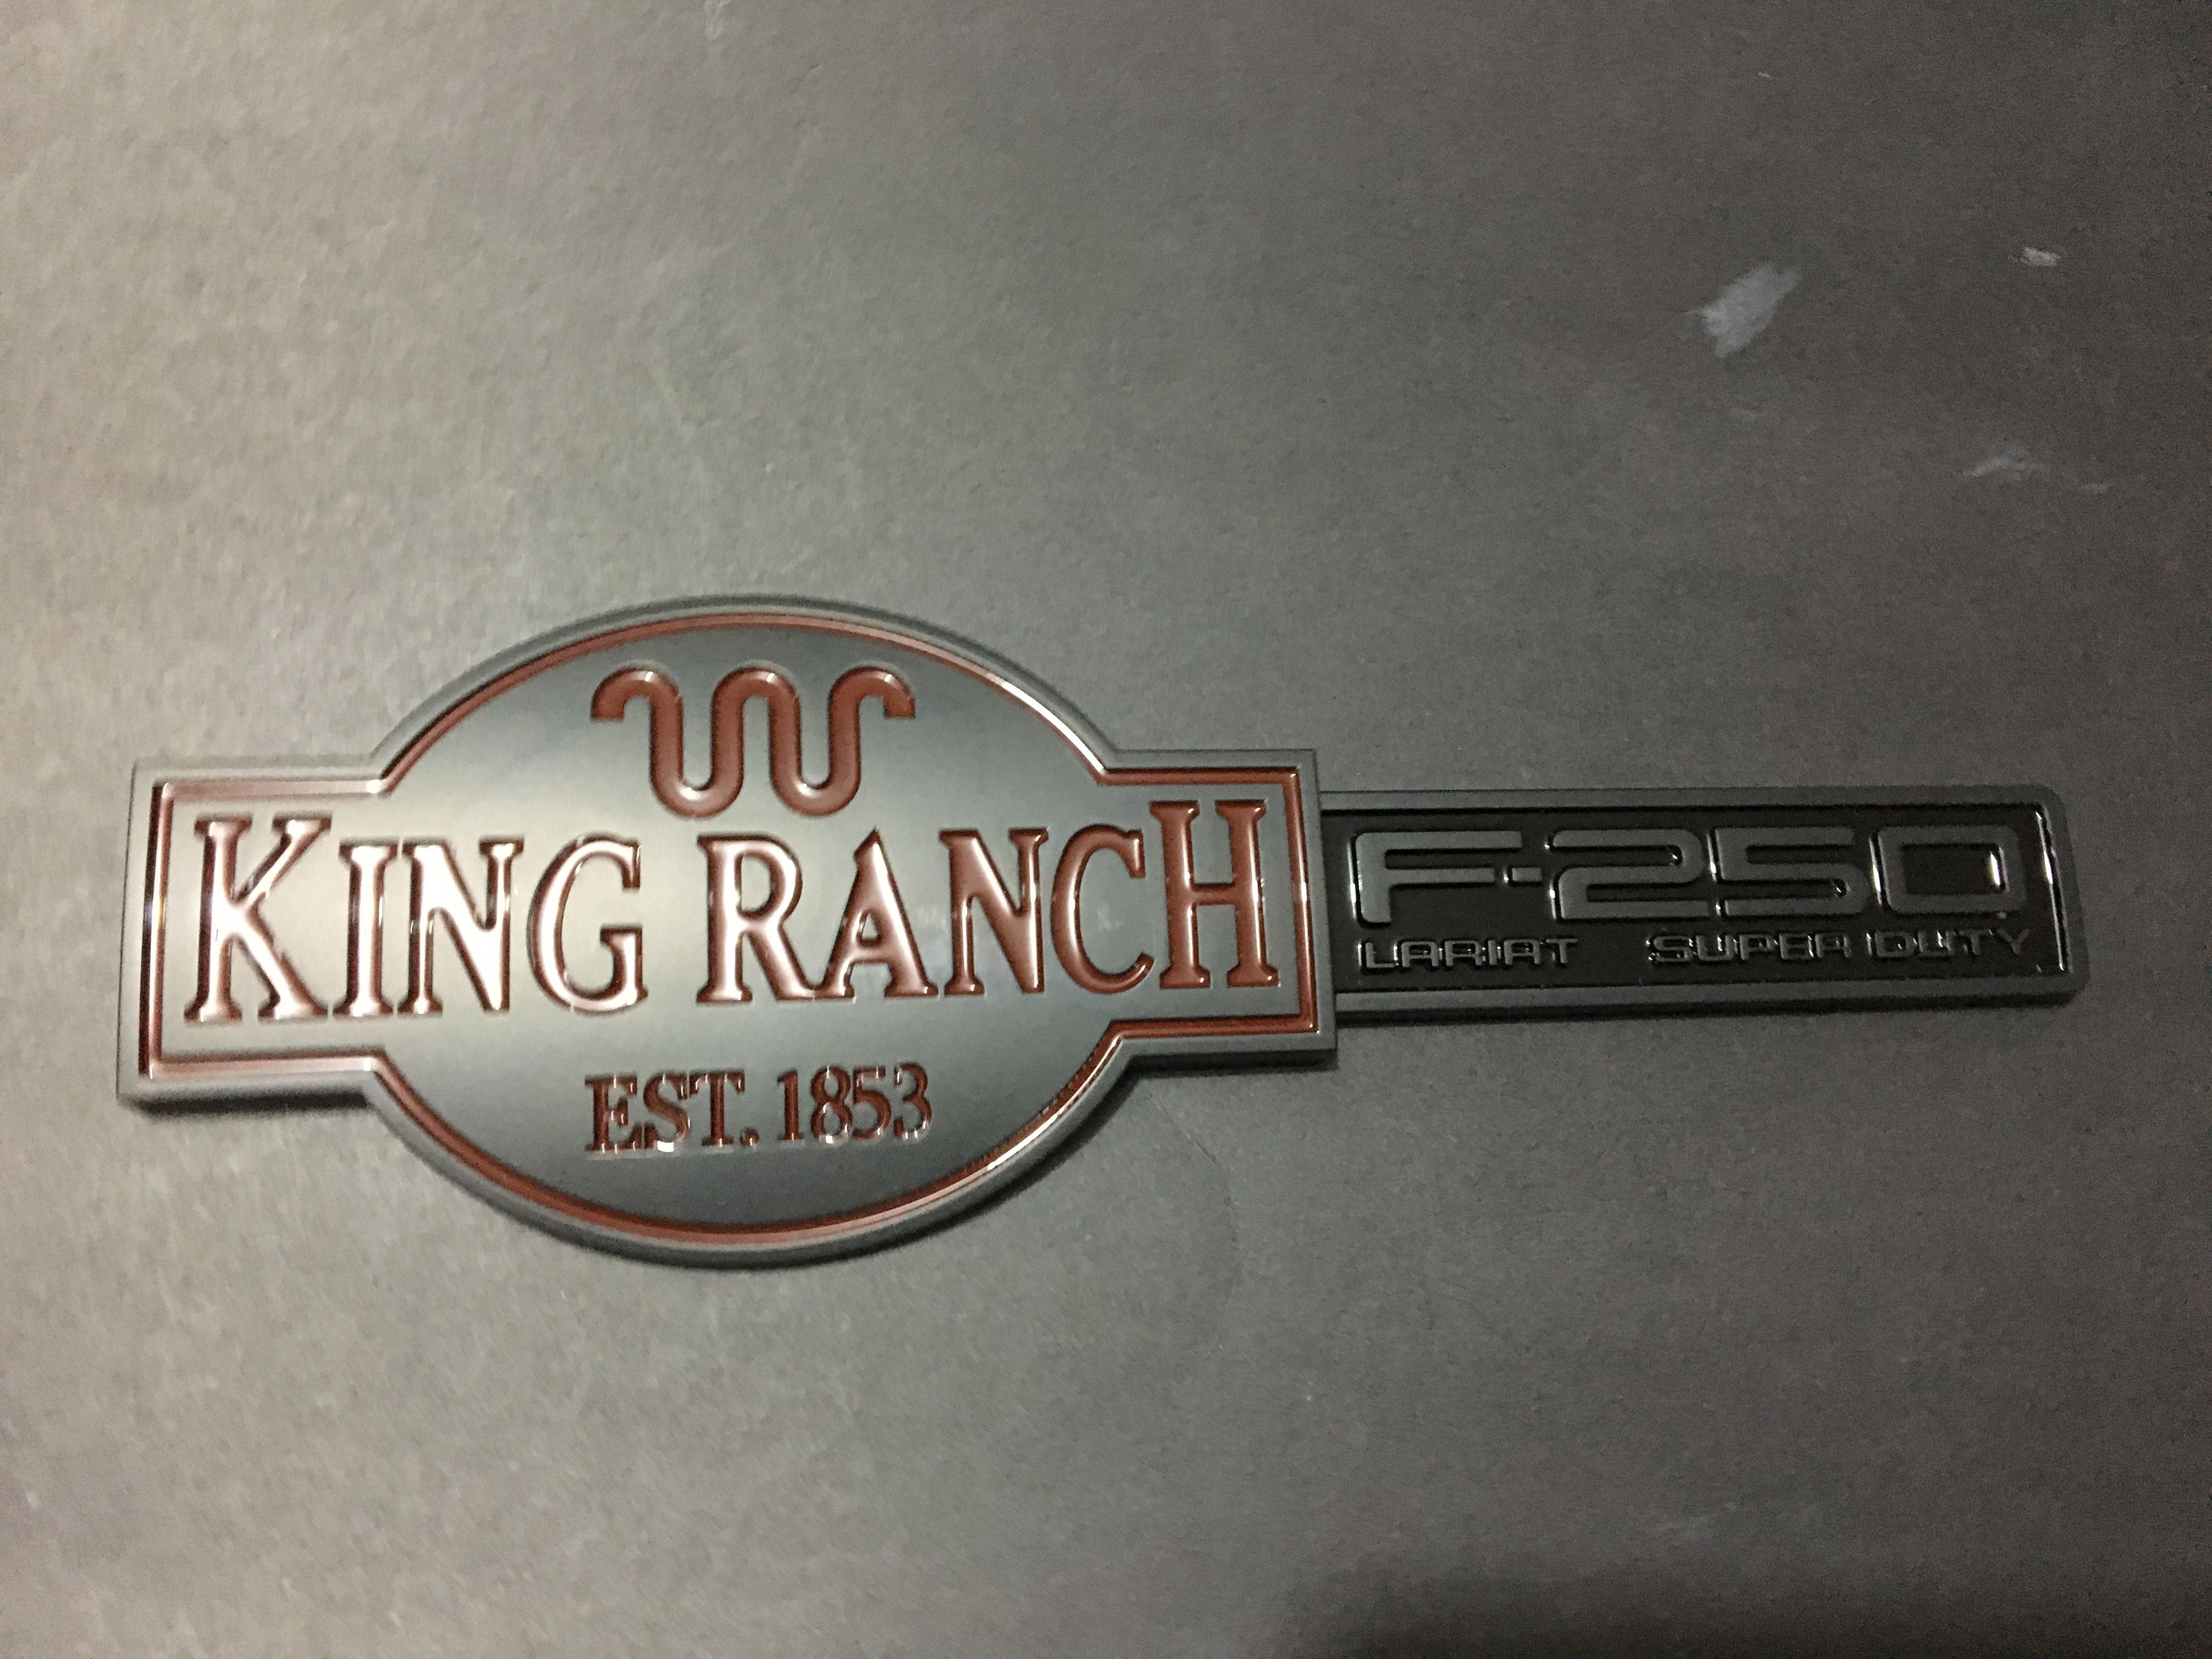 2020 Ford Expedition King Ranch Badge Wallpapers 13 Newcarcars